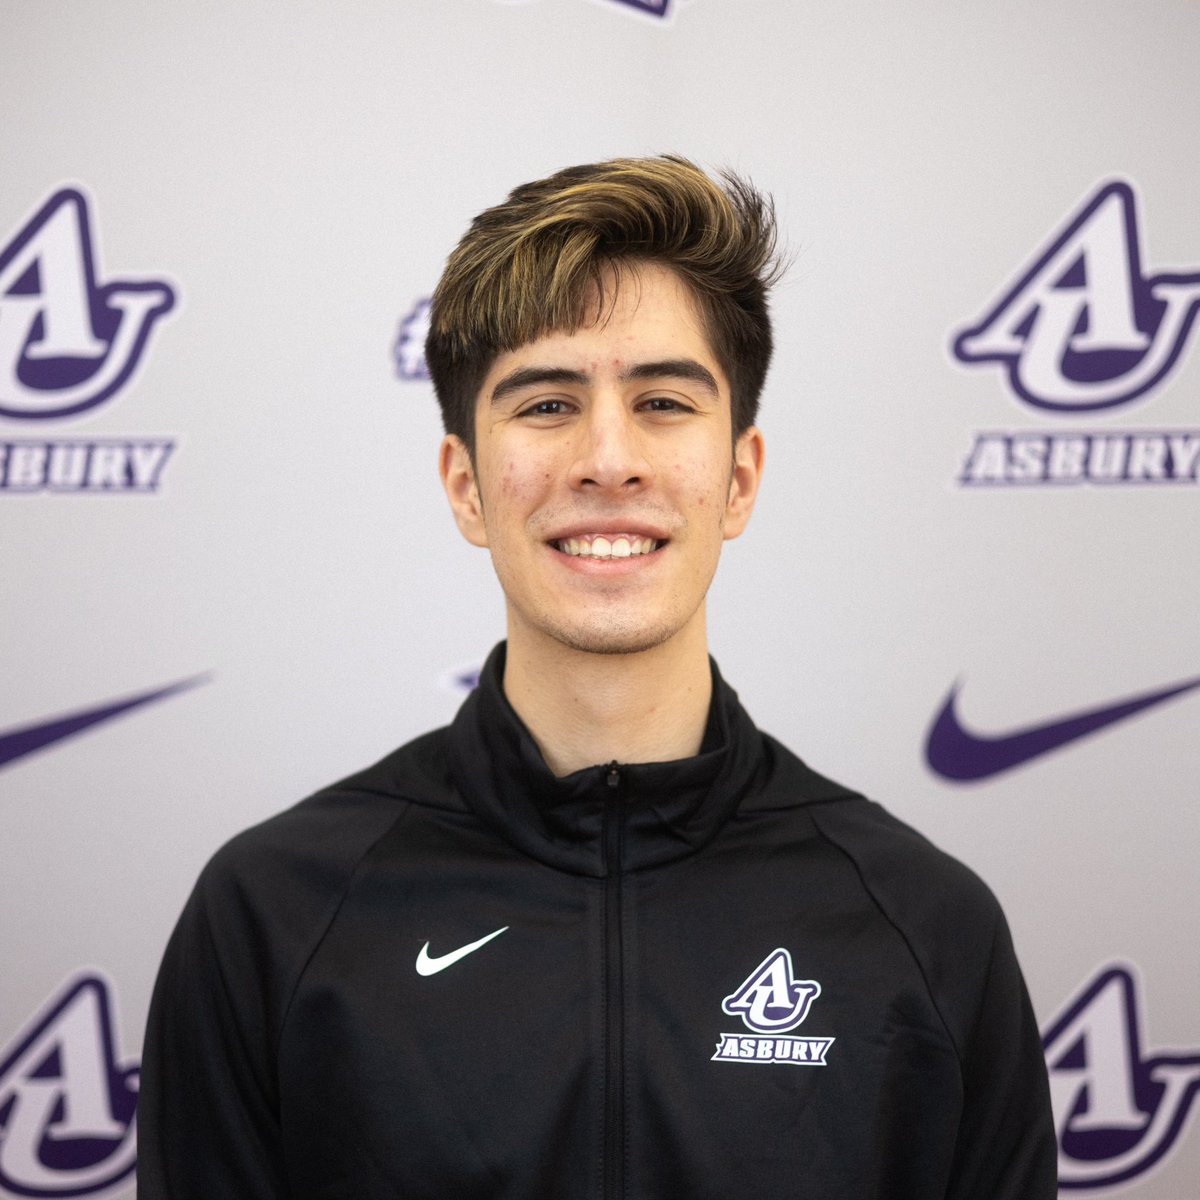 Join us today in wishing a happy birthday to student assistant (social media coordinator) Jared Alfaro! We hope you enjoy a terrific day. #AUbrothers 🎂🎉🎈